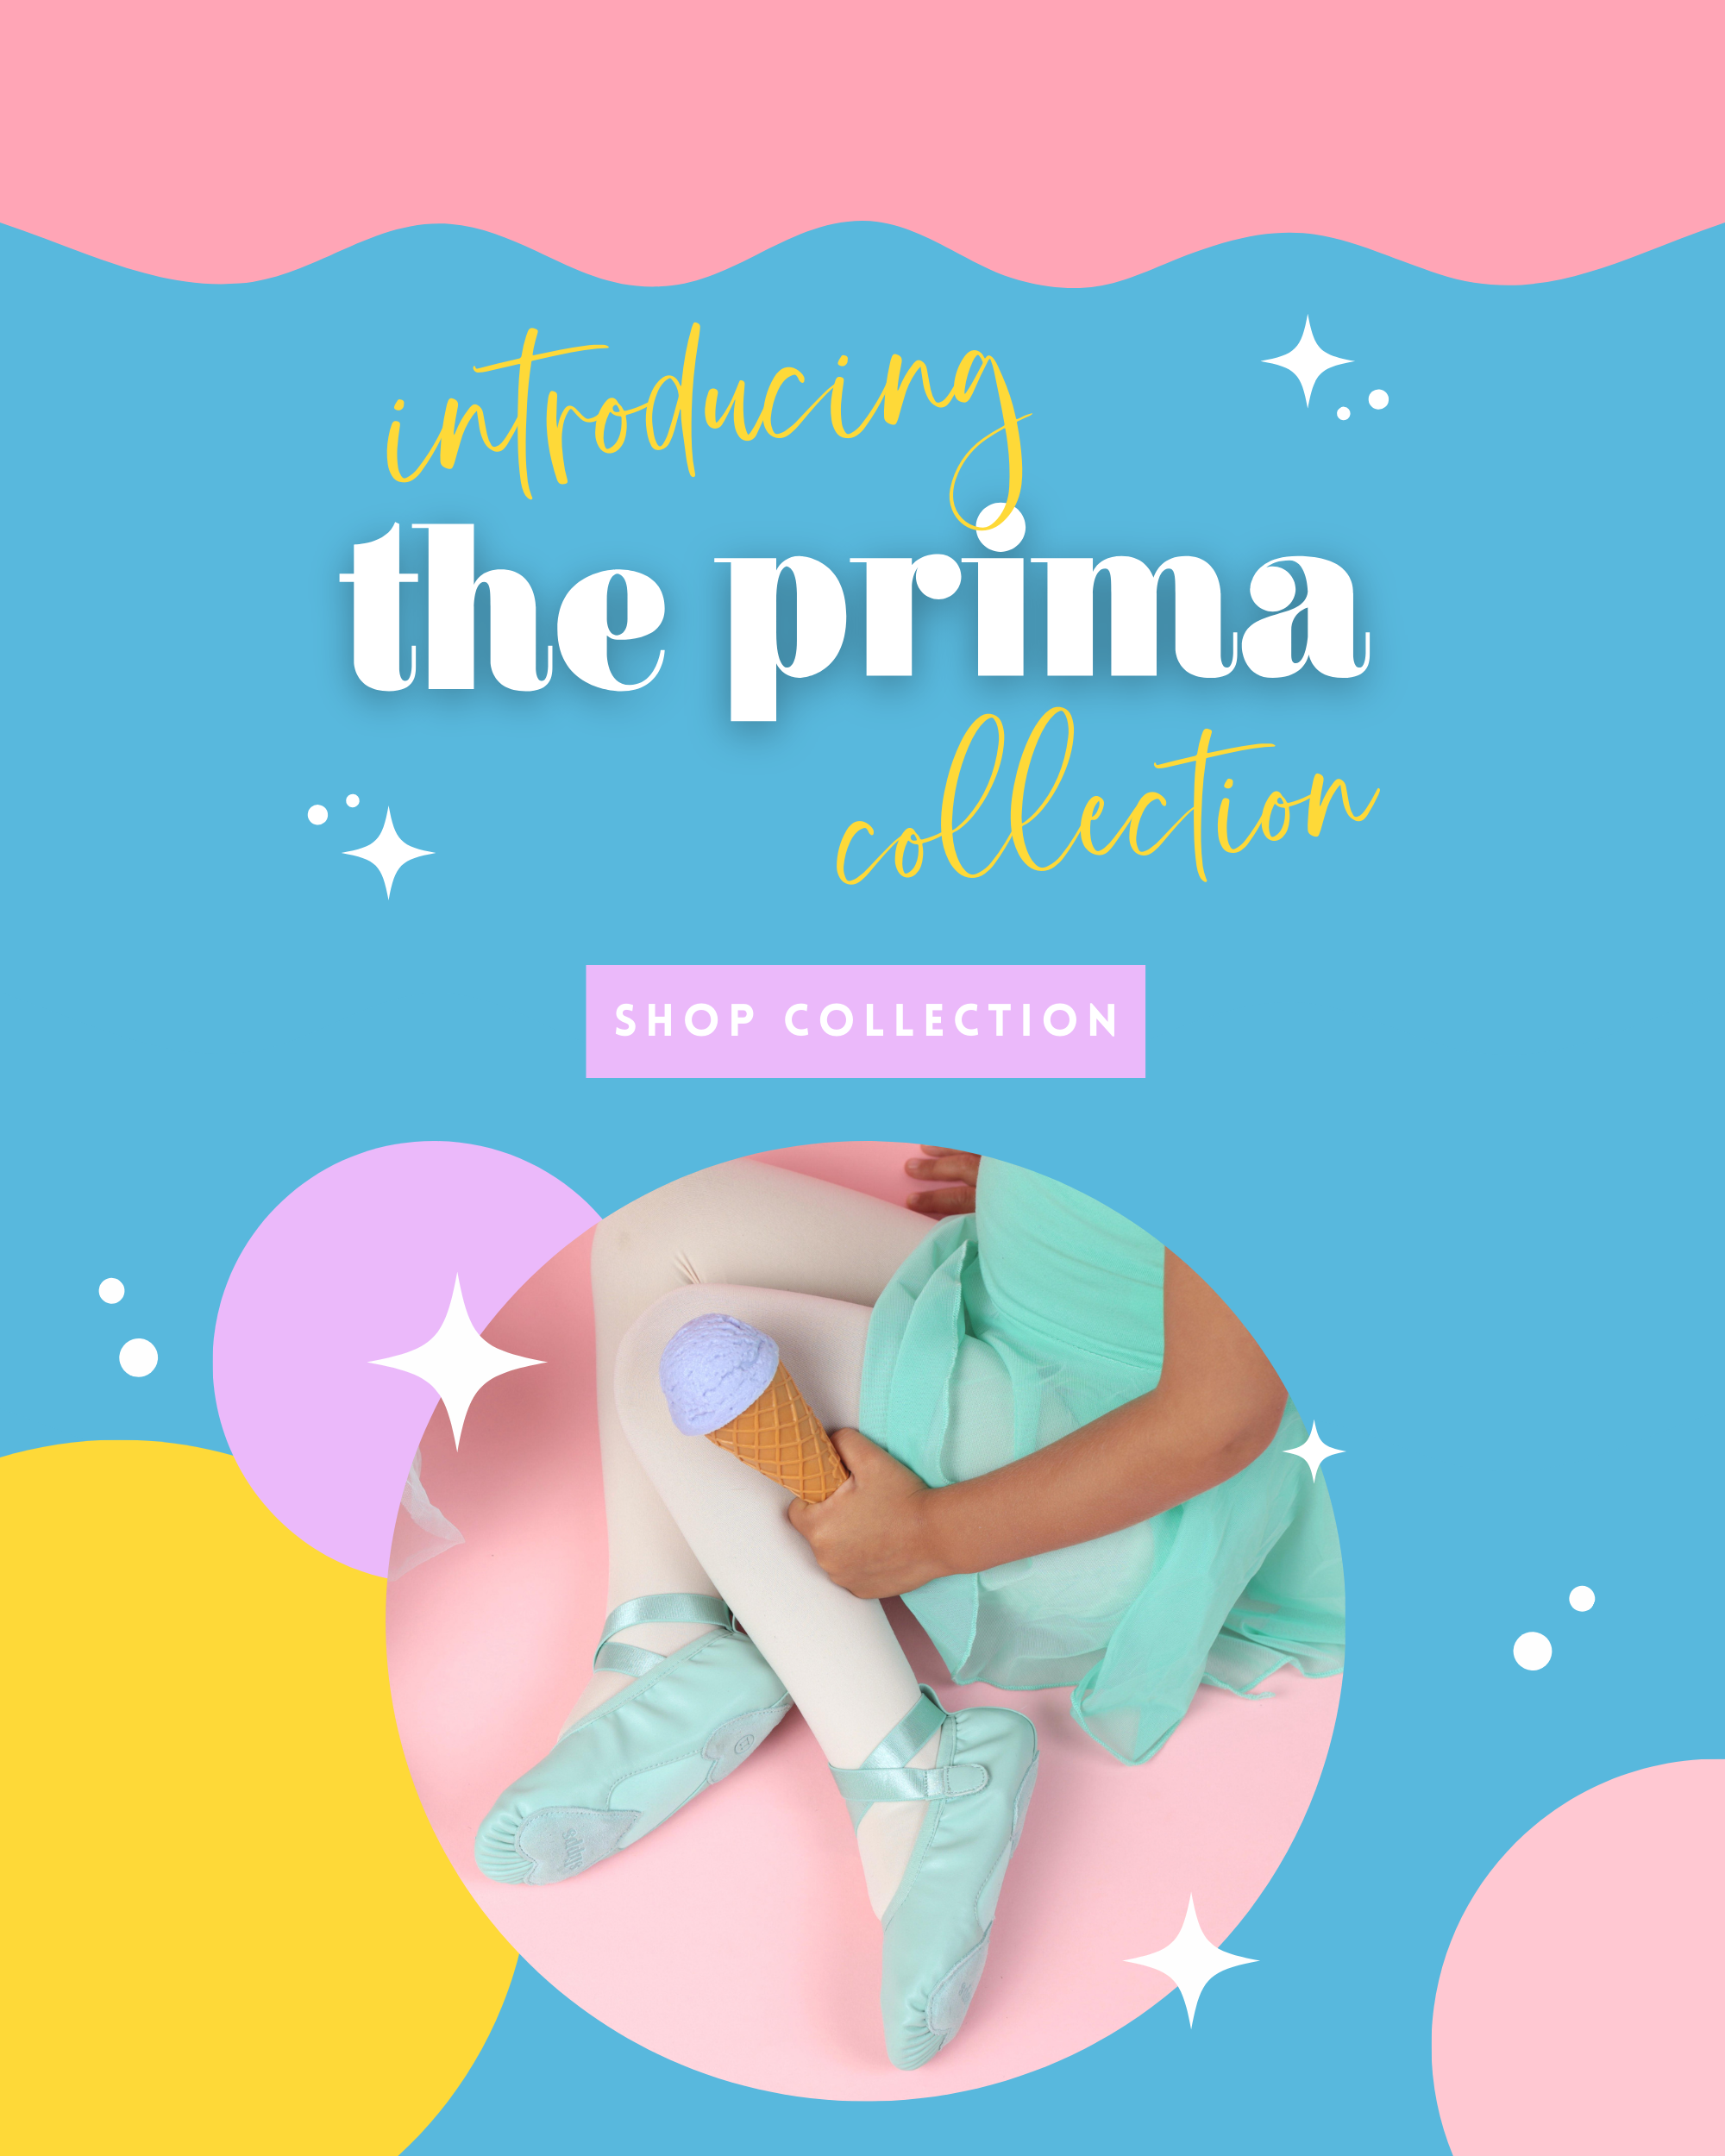 Introducing the prima collection - Slipps